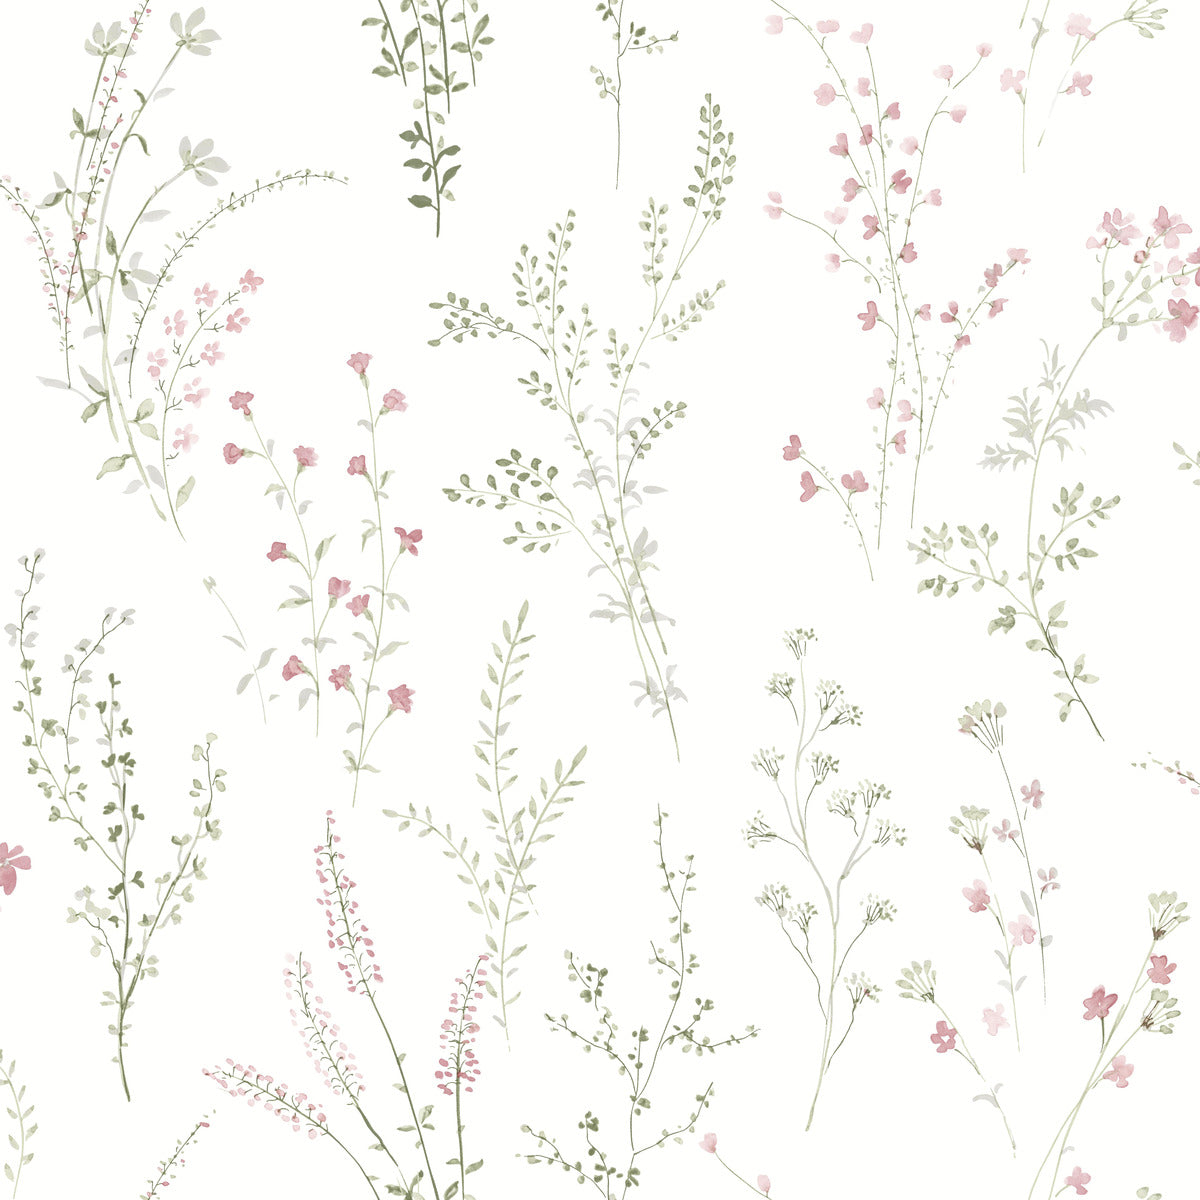 LV402-WI3 On a Spring Day - Blossom - Wildflowers Fabric